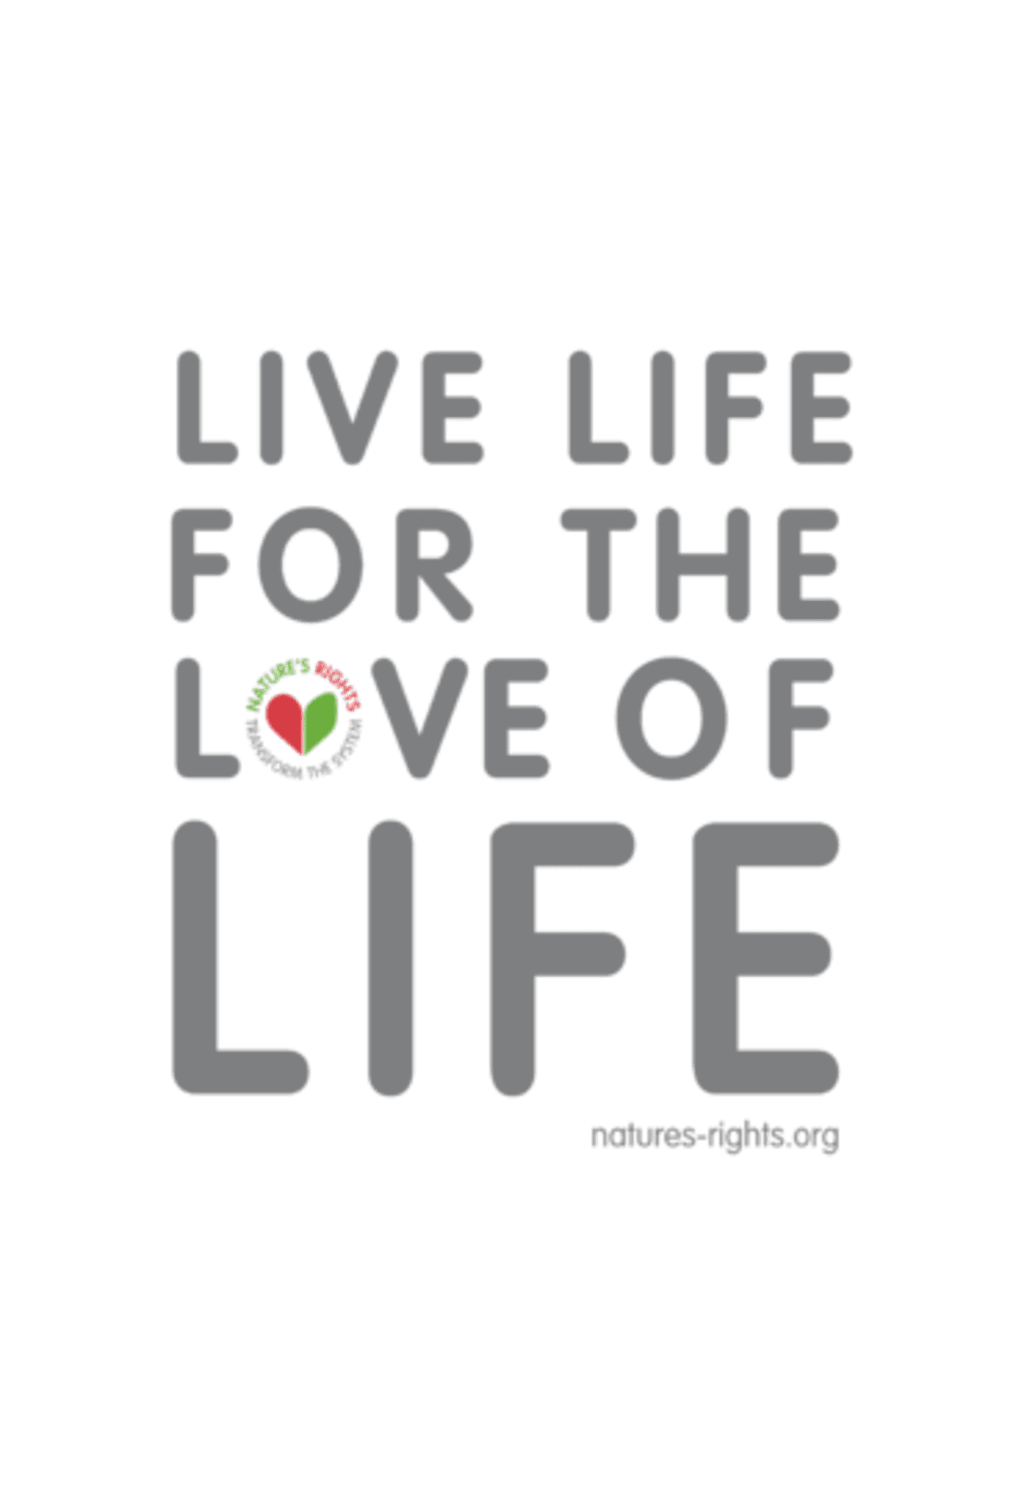 Live life for the love of life